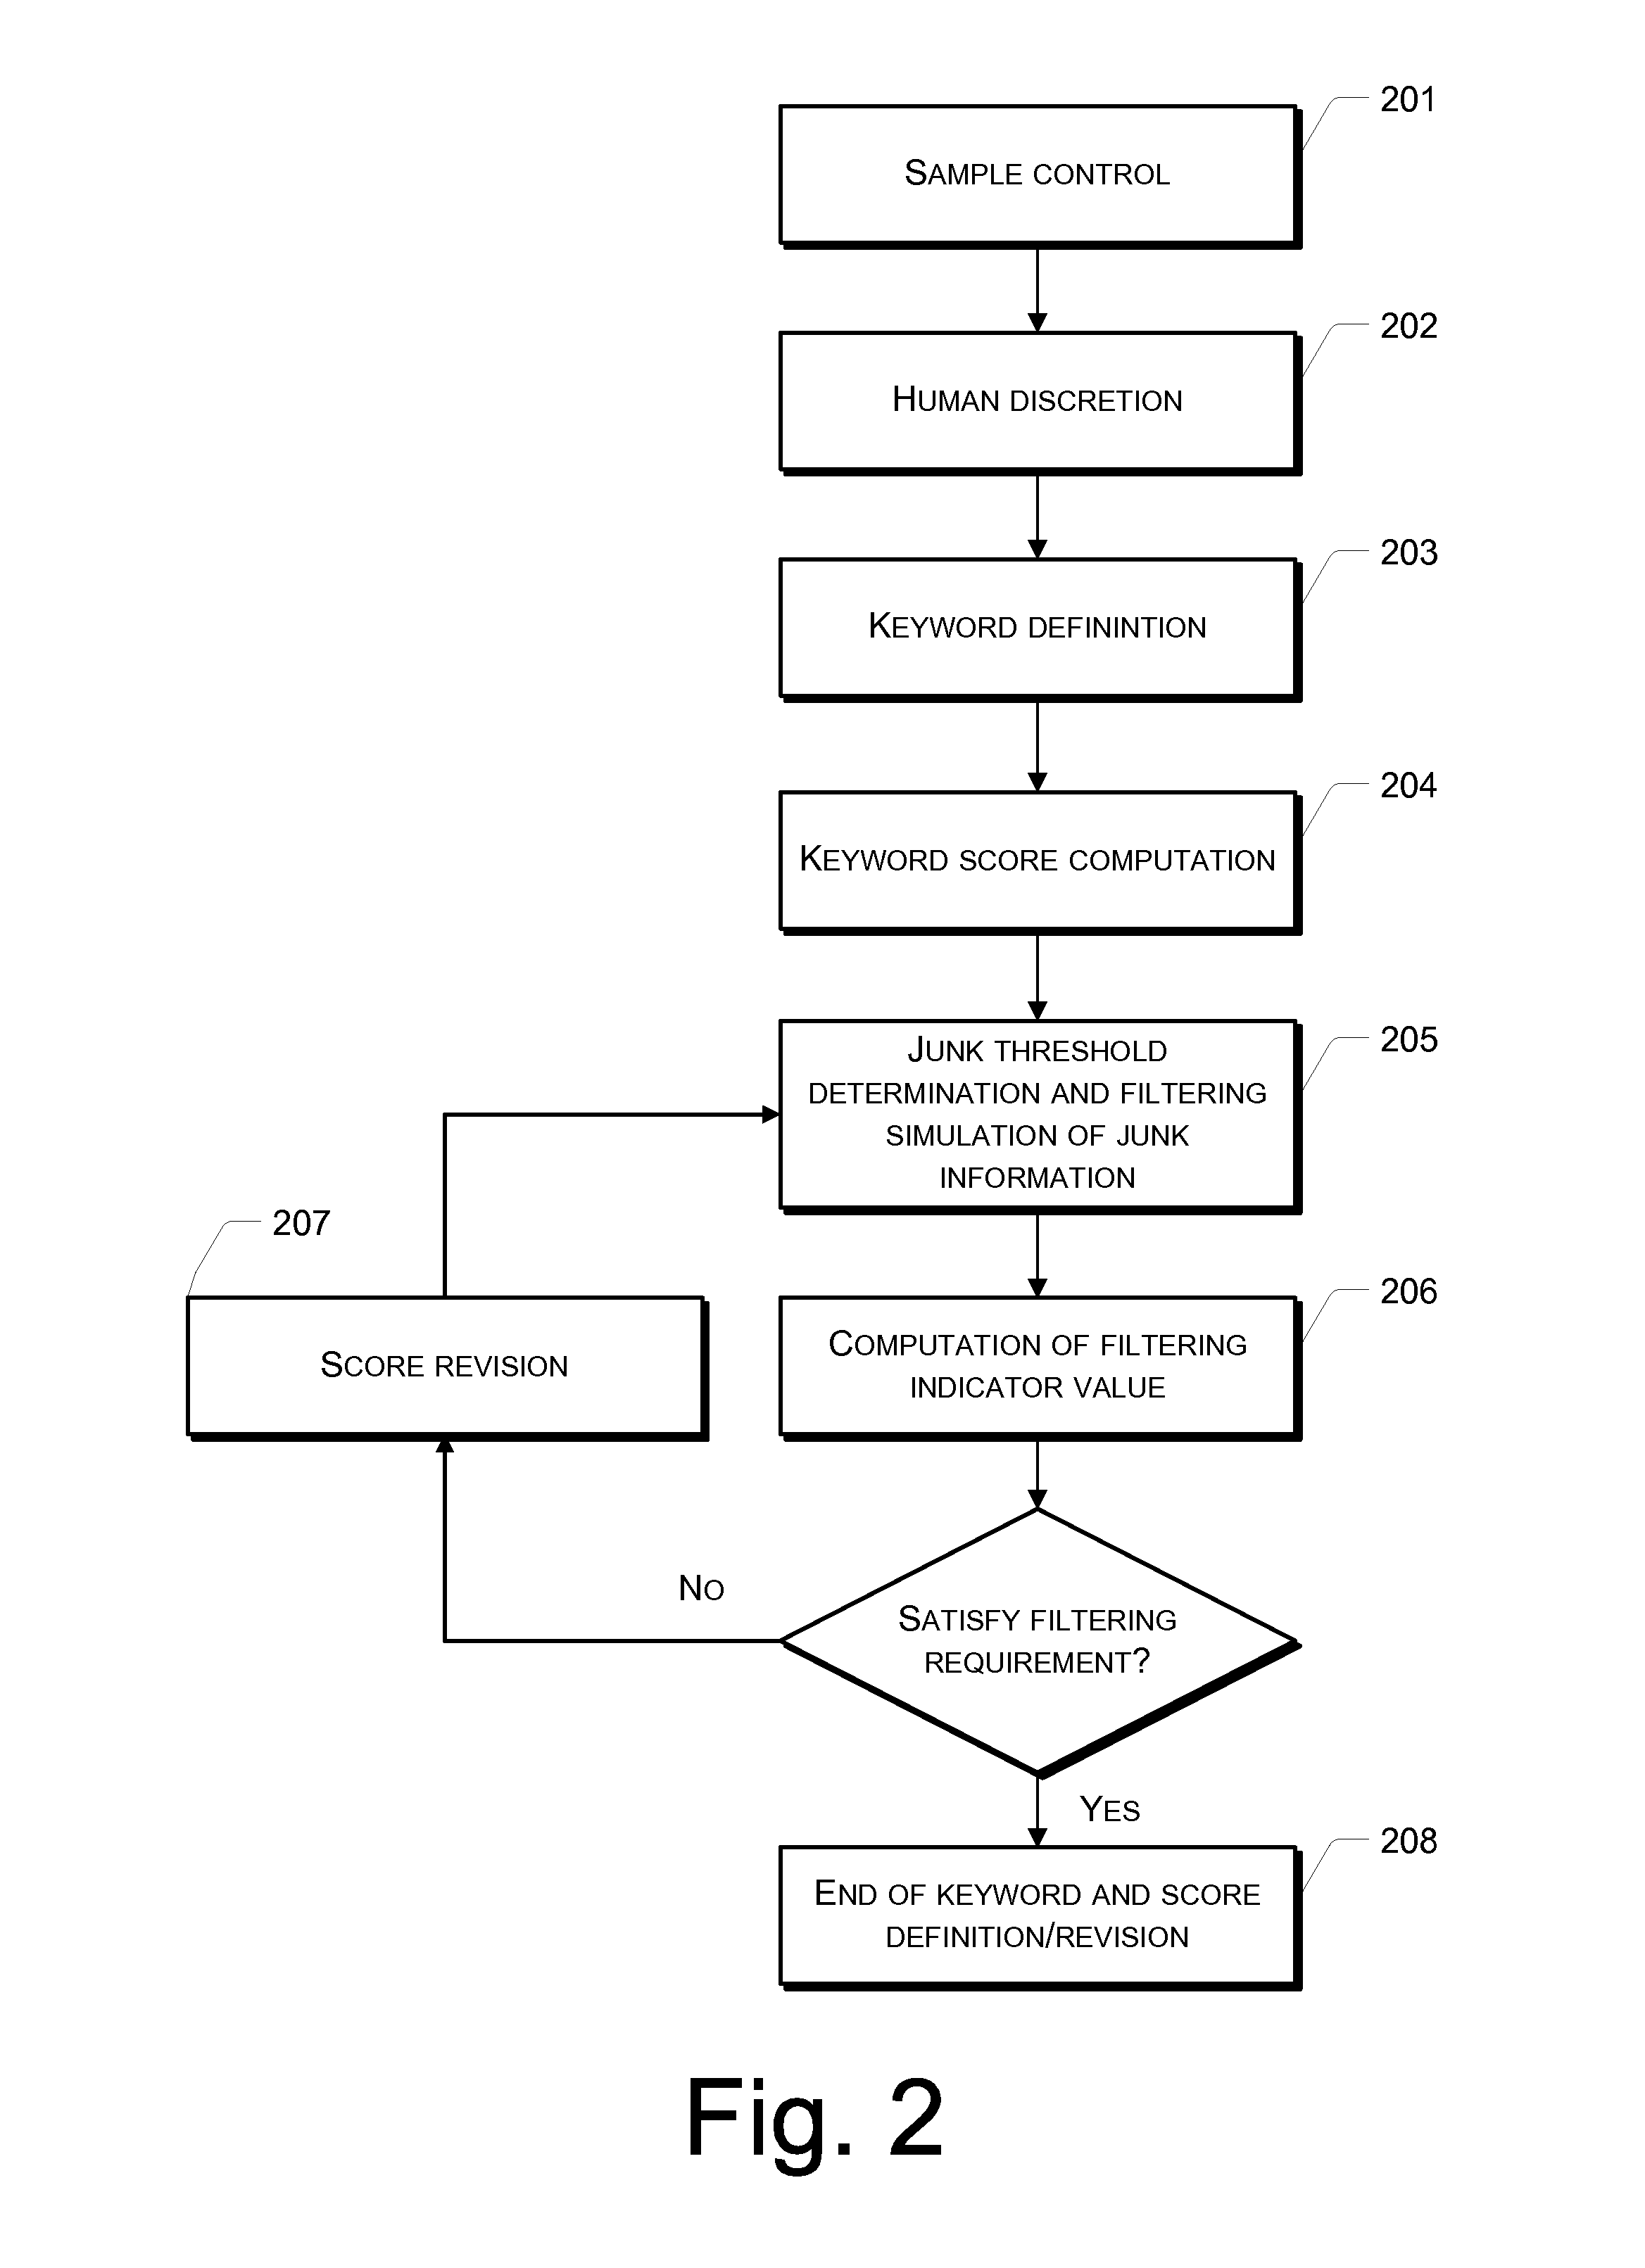 Method and System for Determining Junk Information